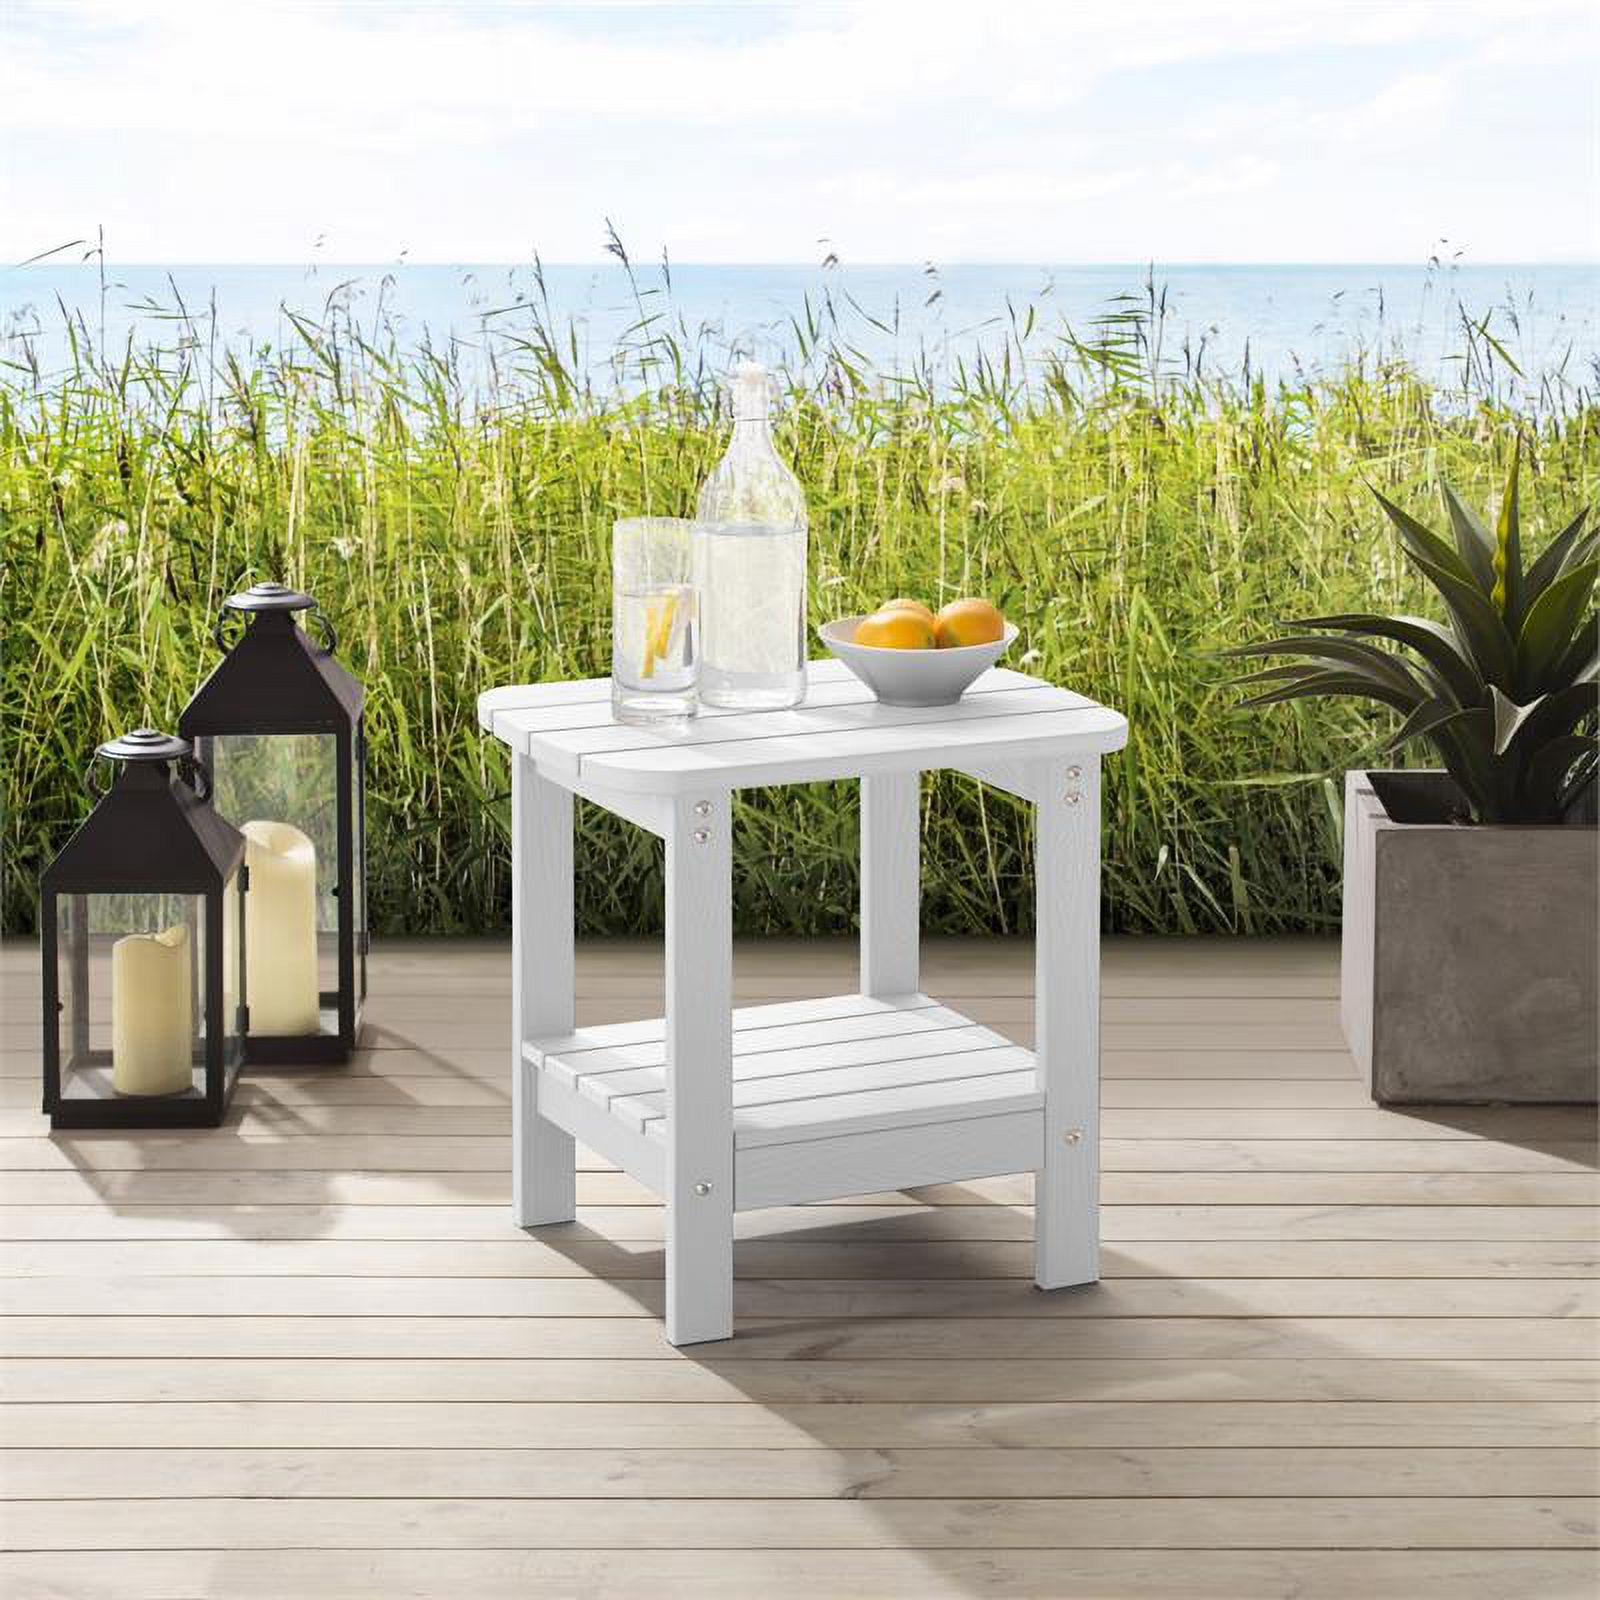 Posh Living Clive Outdoor Side Table White - image 2 of 9